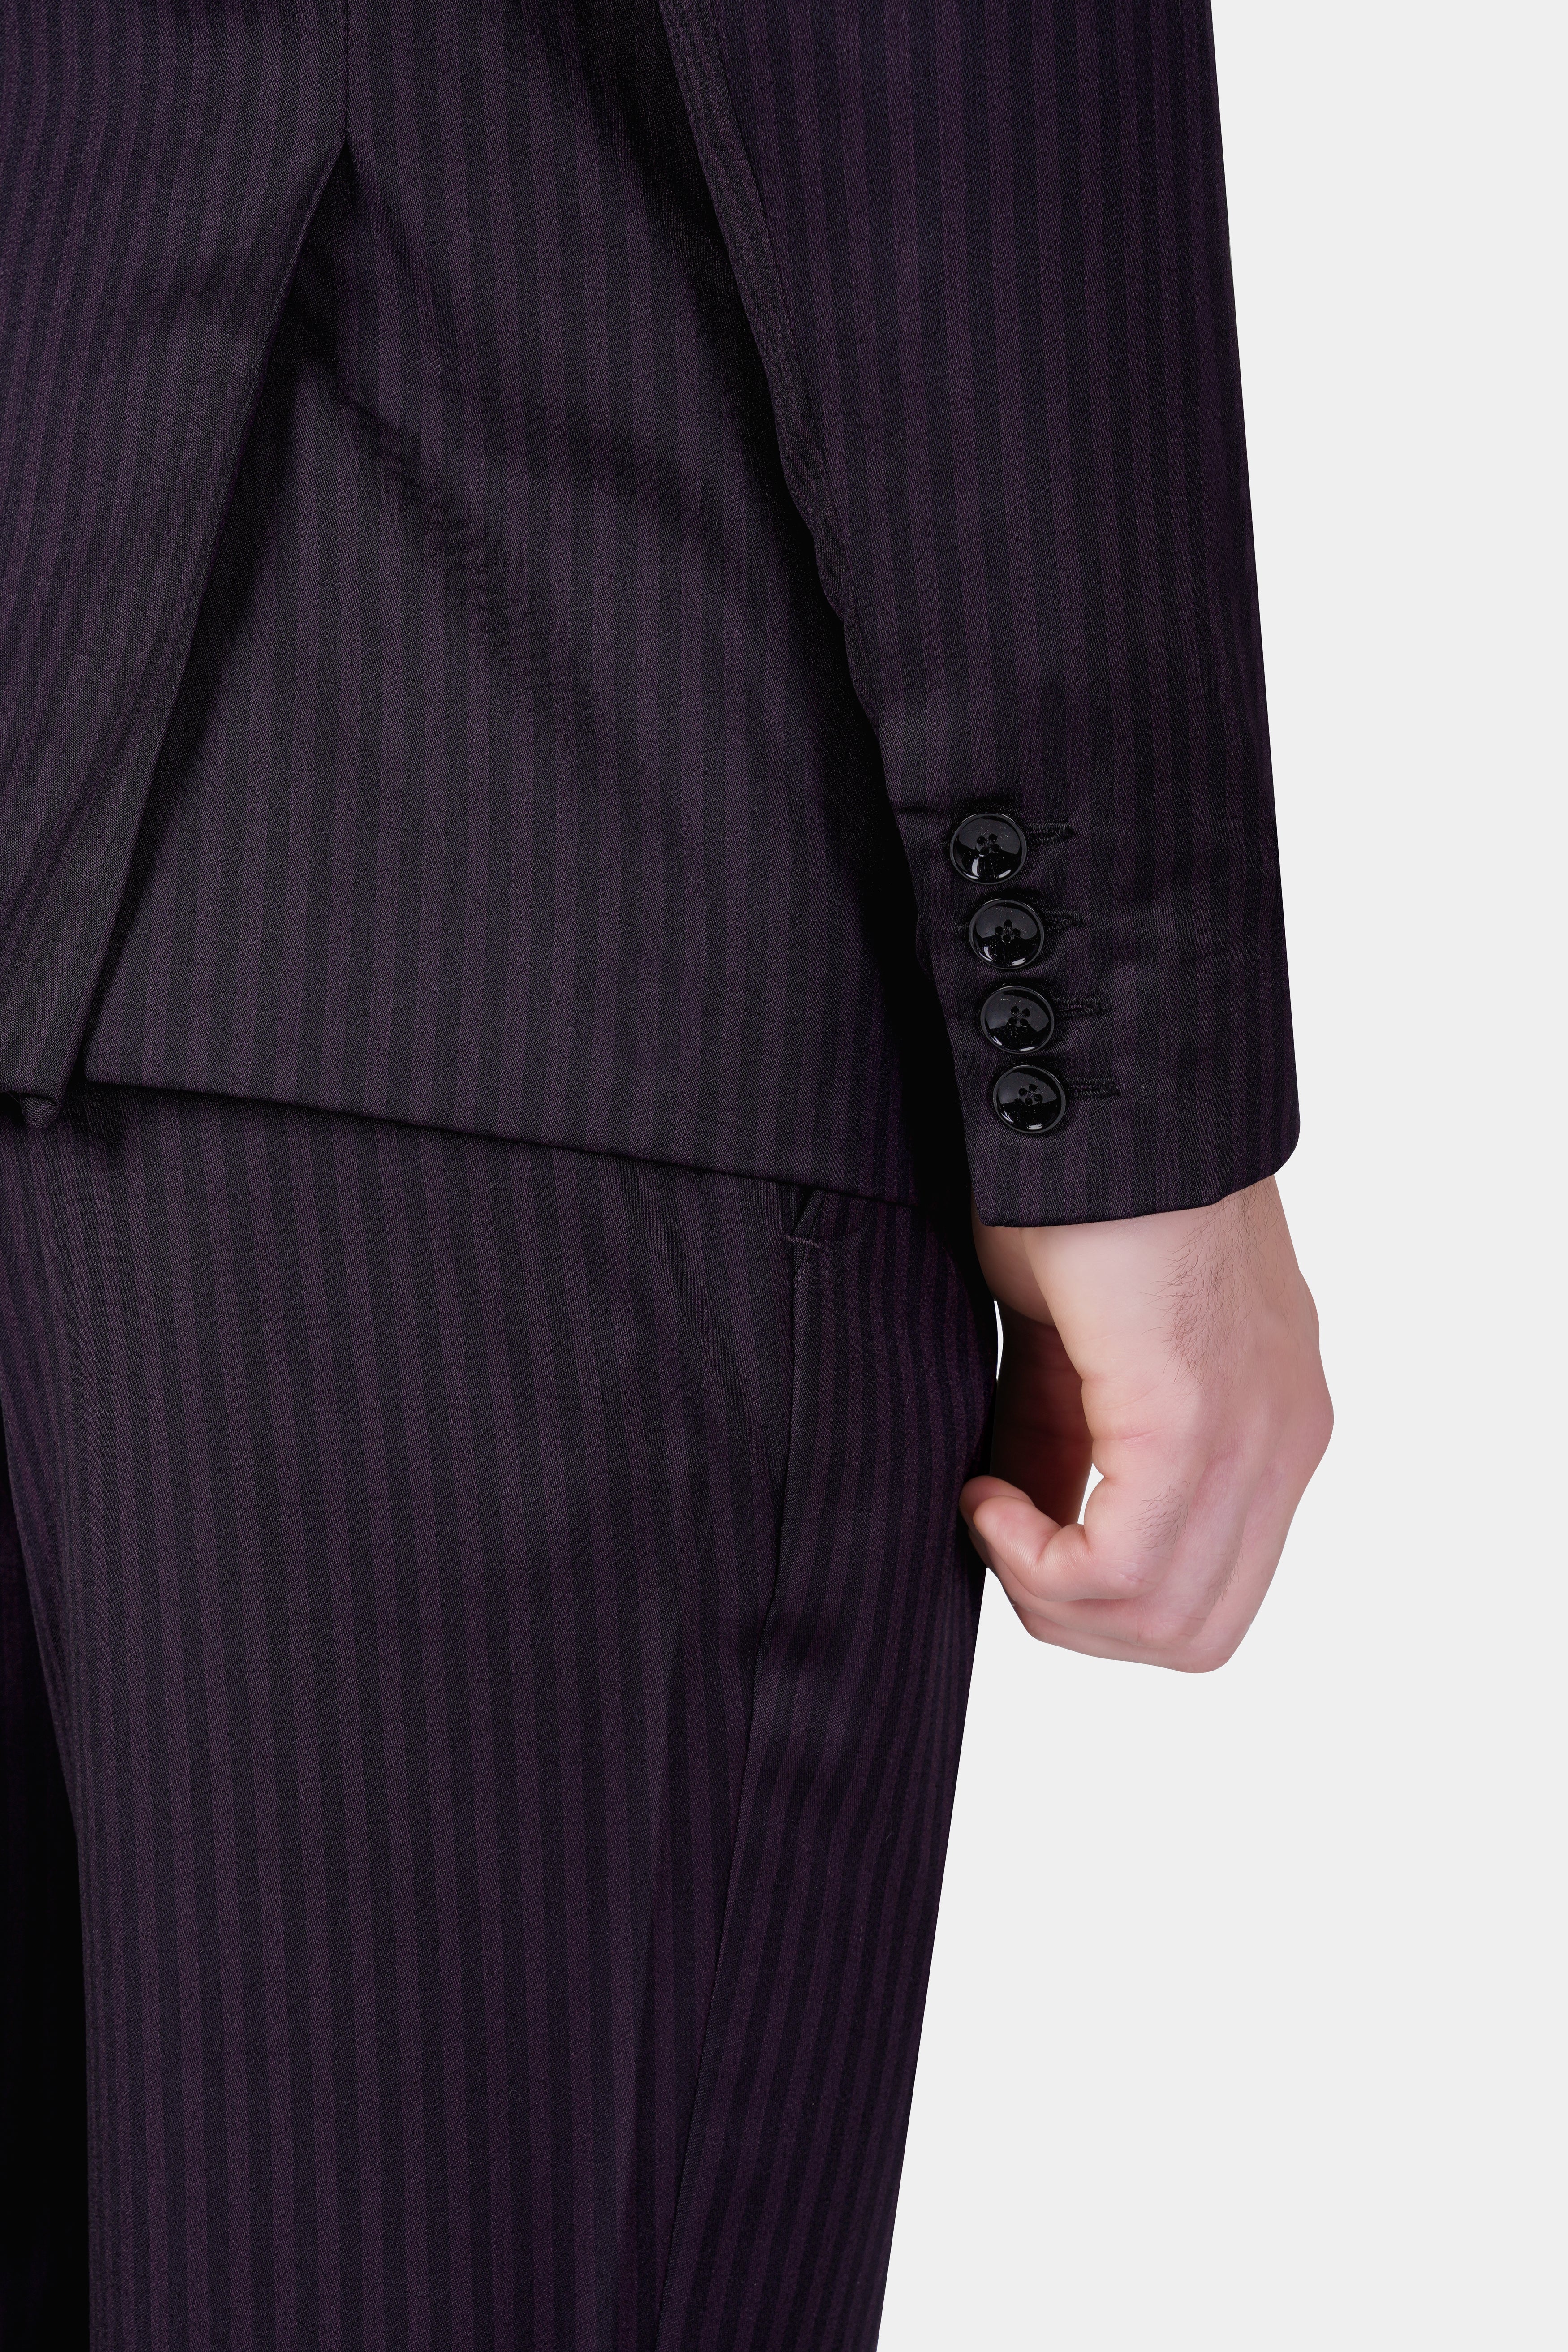 Imperial Purple and Black Striped Wool Rich Blazer BL3119-SB-36, BL3119-SB-38, BL3119-SB-40, BL3119-SB-42, BL3119-SB-44, BL3119-SB-46, BL3119-SB-48, BL3119-SB-50, BL3119-SB-52, BL3119-SB-54, BL3119-SB-56, BL3119-SB-58, BL3119-SB-60